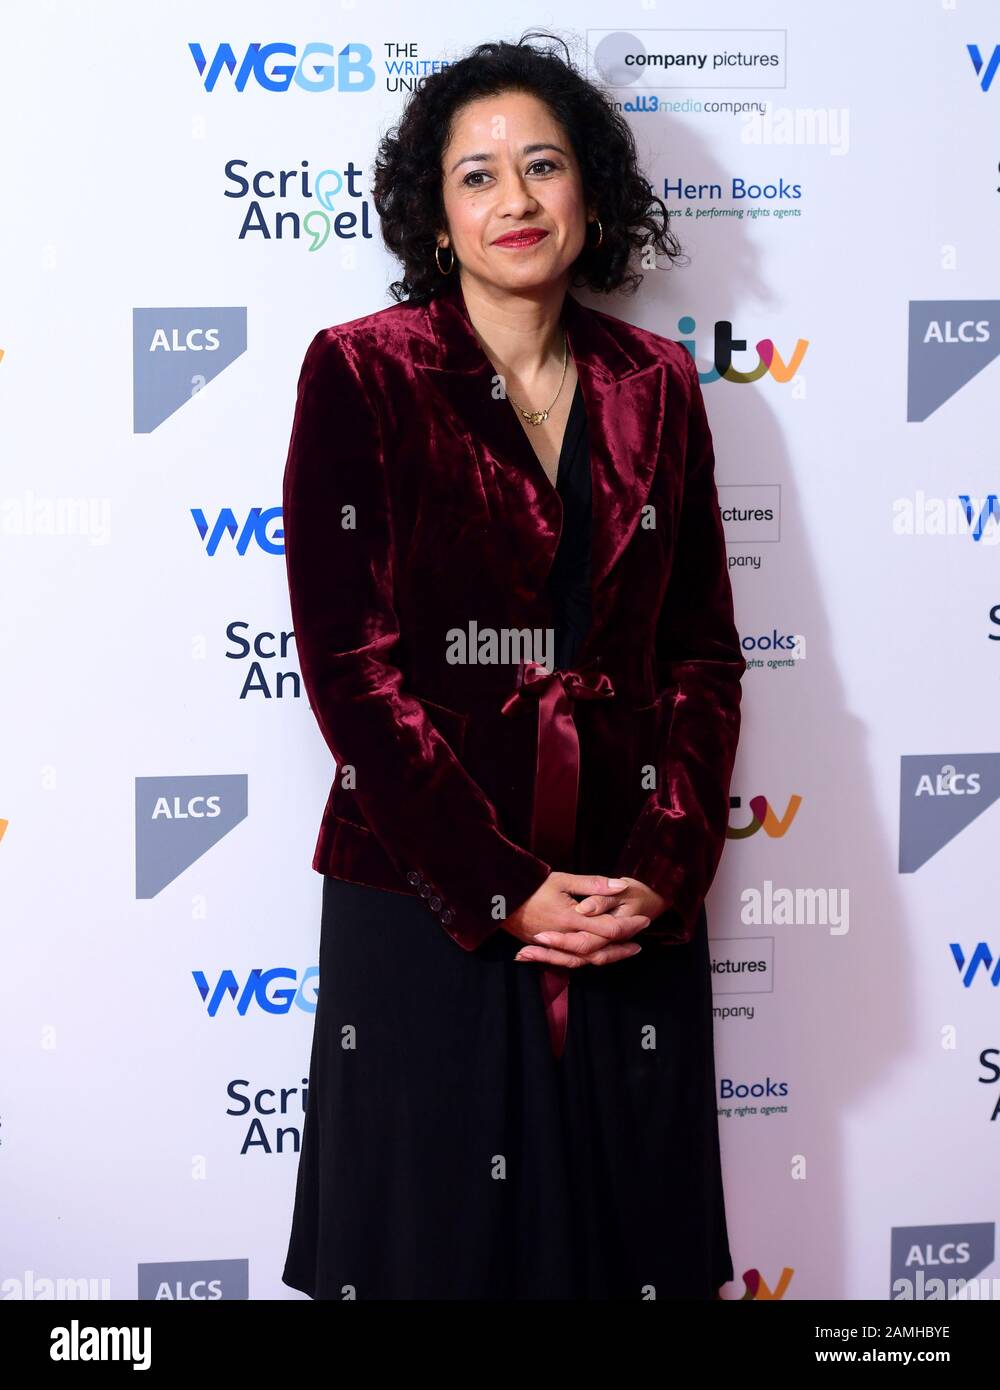 arrives at The Writers' Guild Awards 2020 held at the Royal College of Physicians, London. Stock Photo